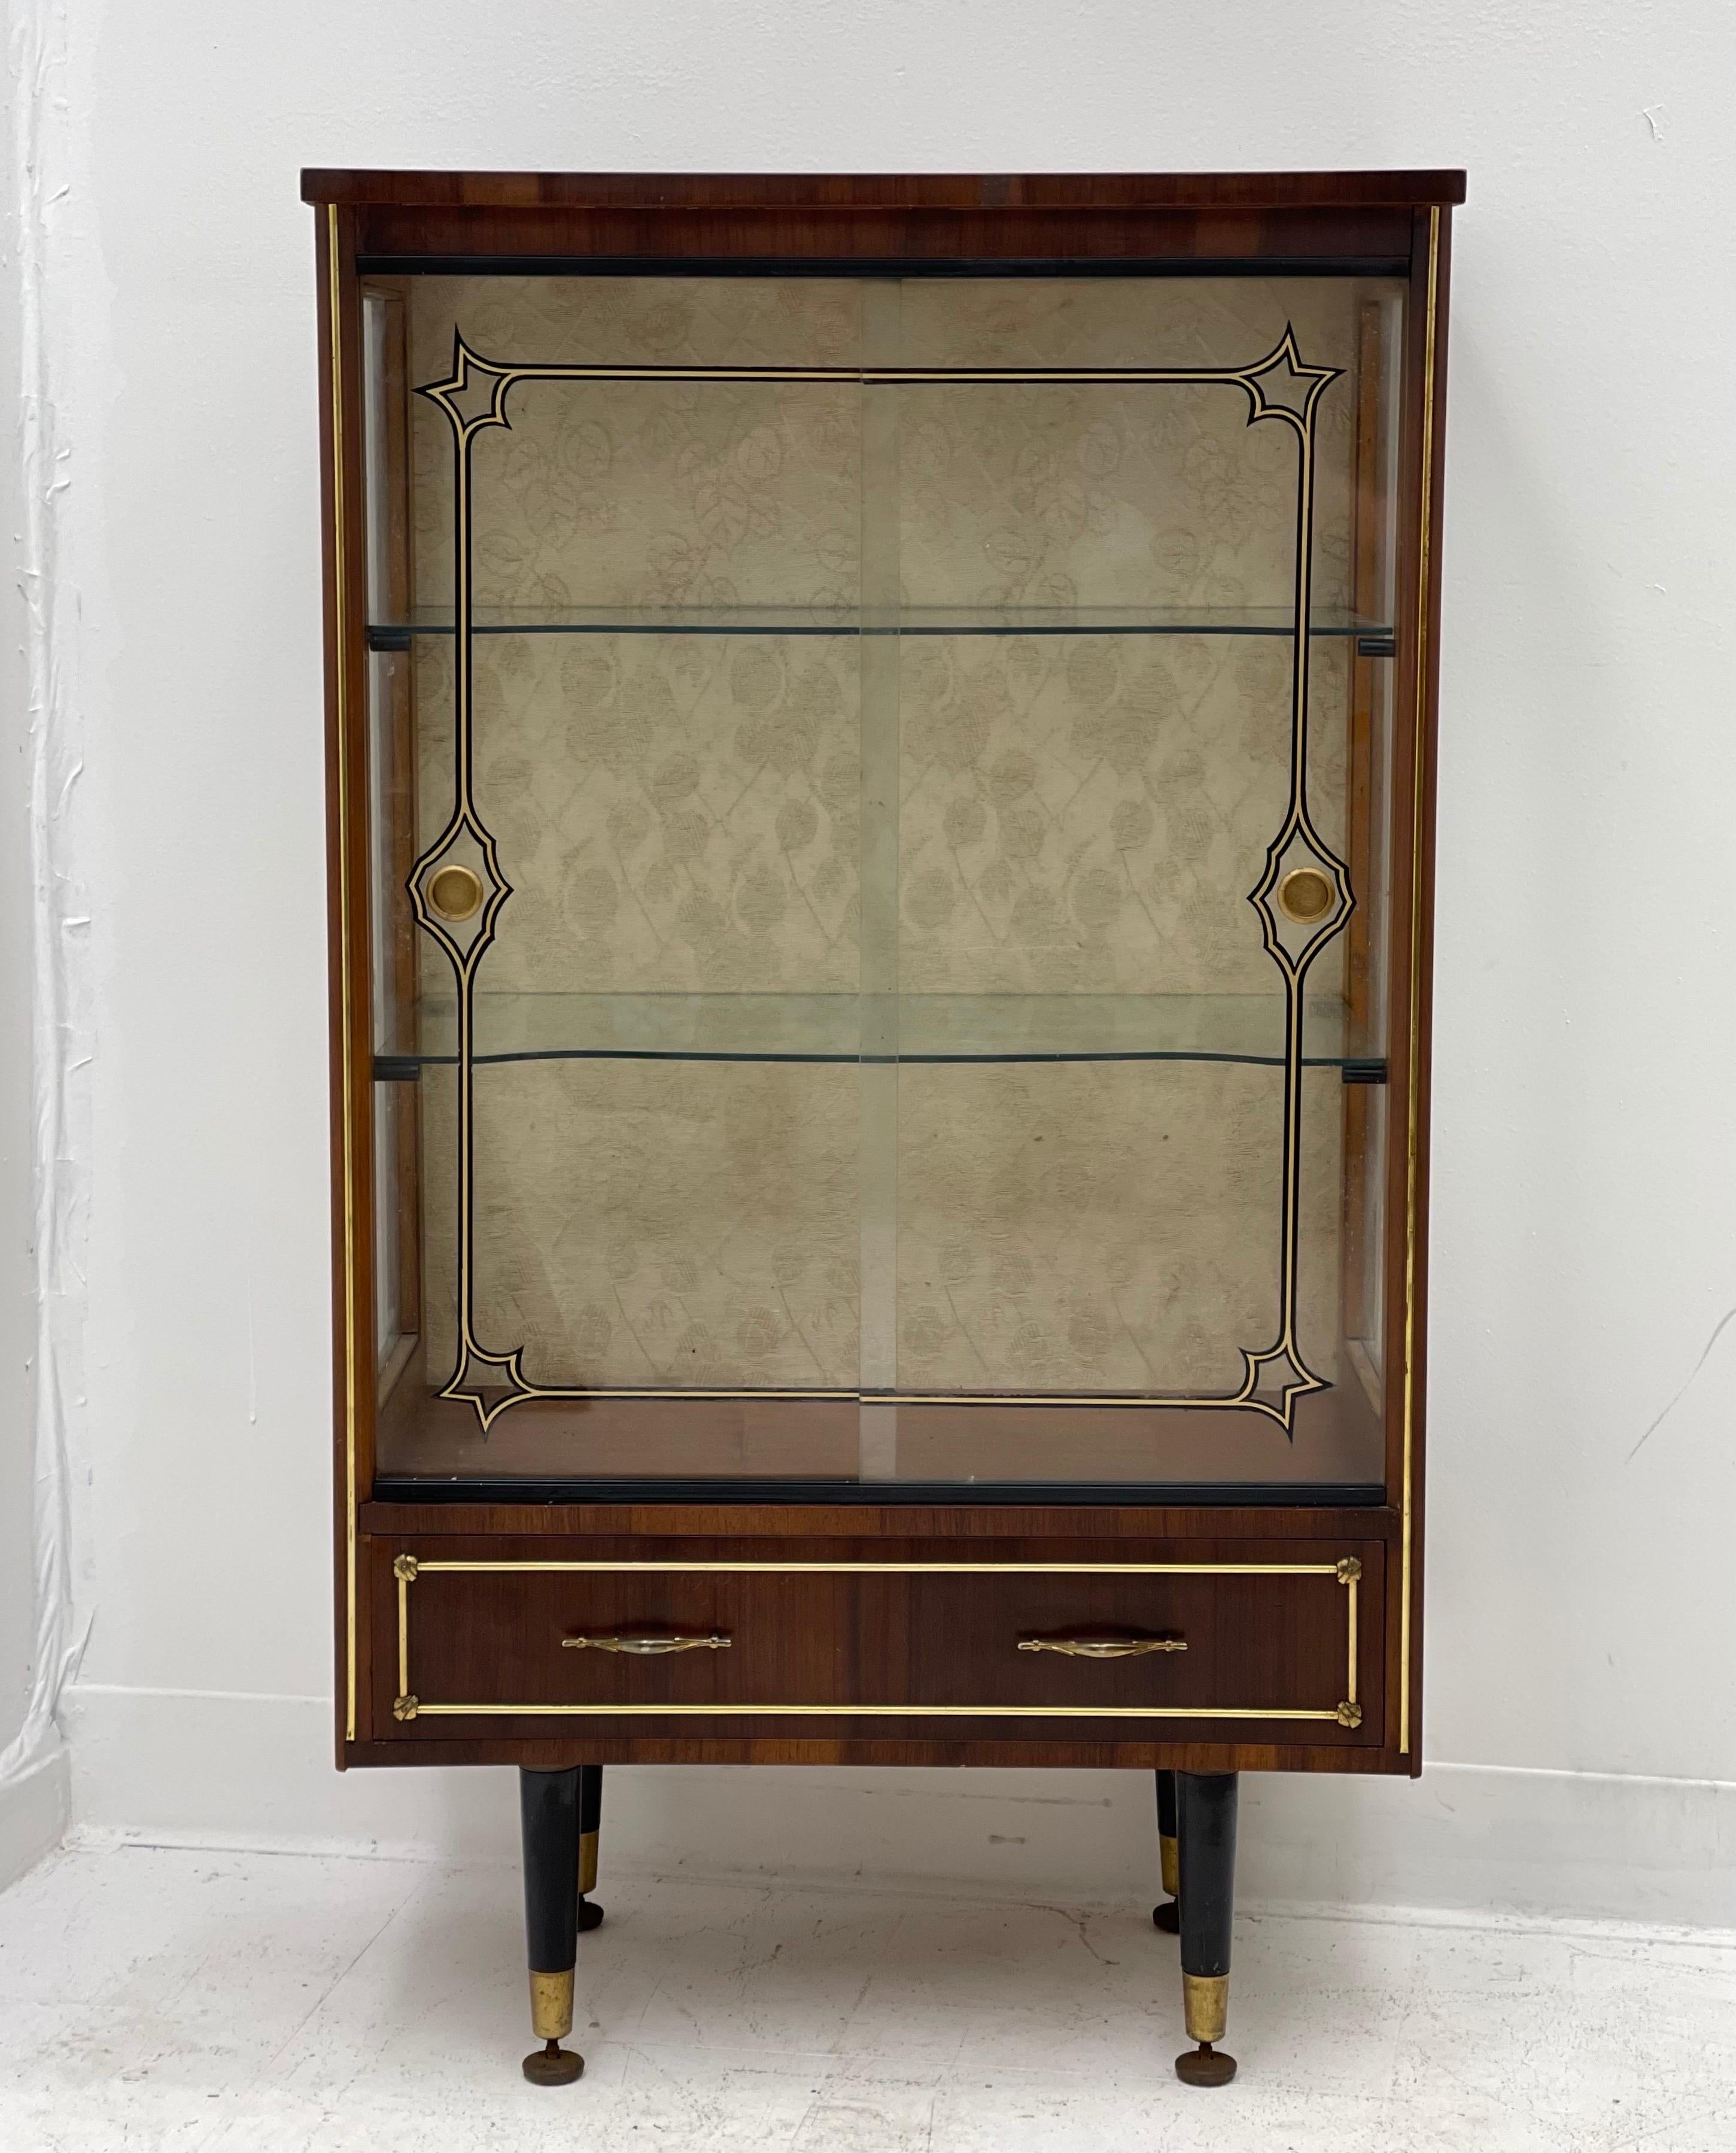 Vintage Mid Century Modern Retro Glass Case Cabinet or Bookcase. Beautiful and minimalist design from the 1950s.